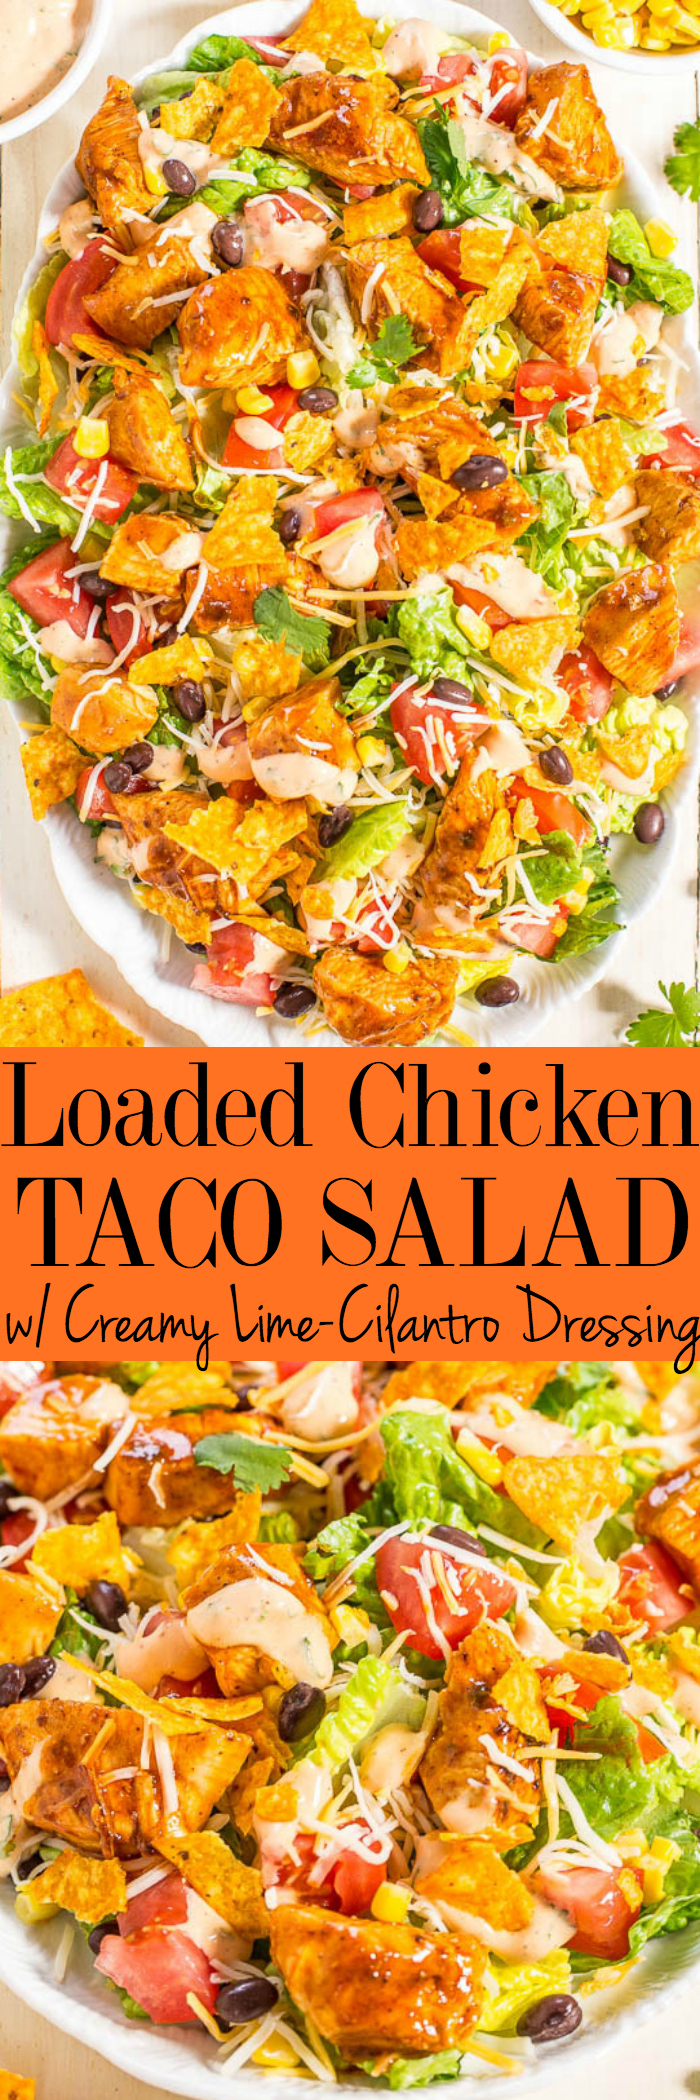 Loaded Chicken Taco Salad with Creamy Lime-Cilantro Dressing - Fast, easy, fresh and healthy!! All your favorite taco flavors in one big kickin' salad that everyone will love!! 